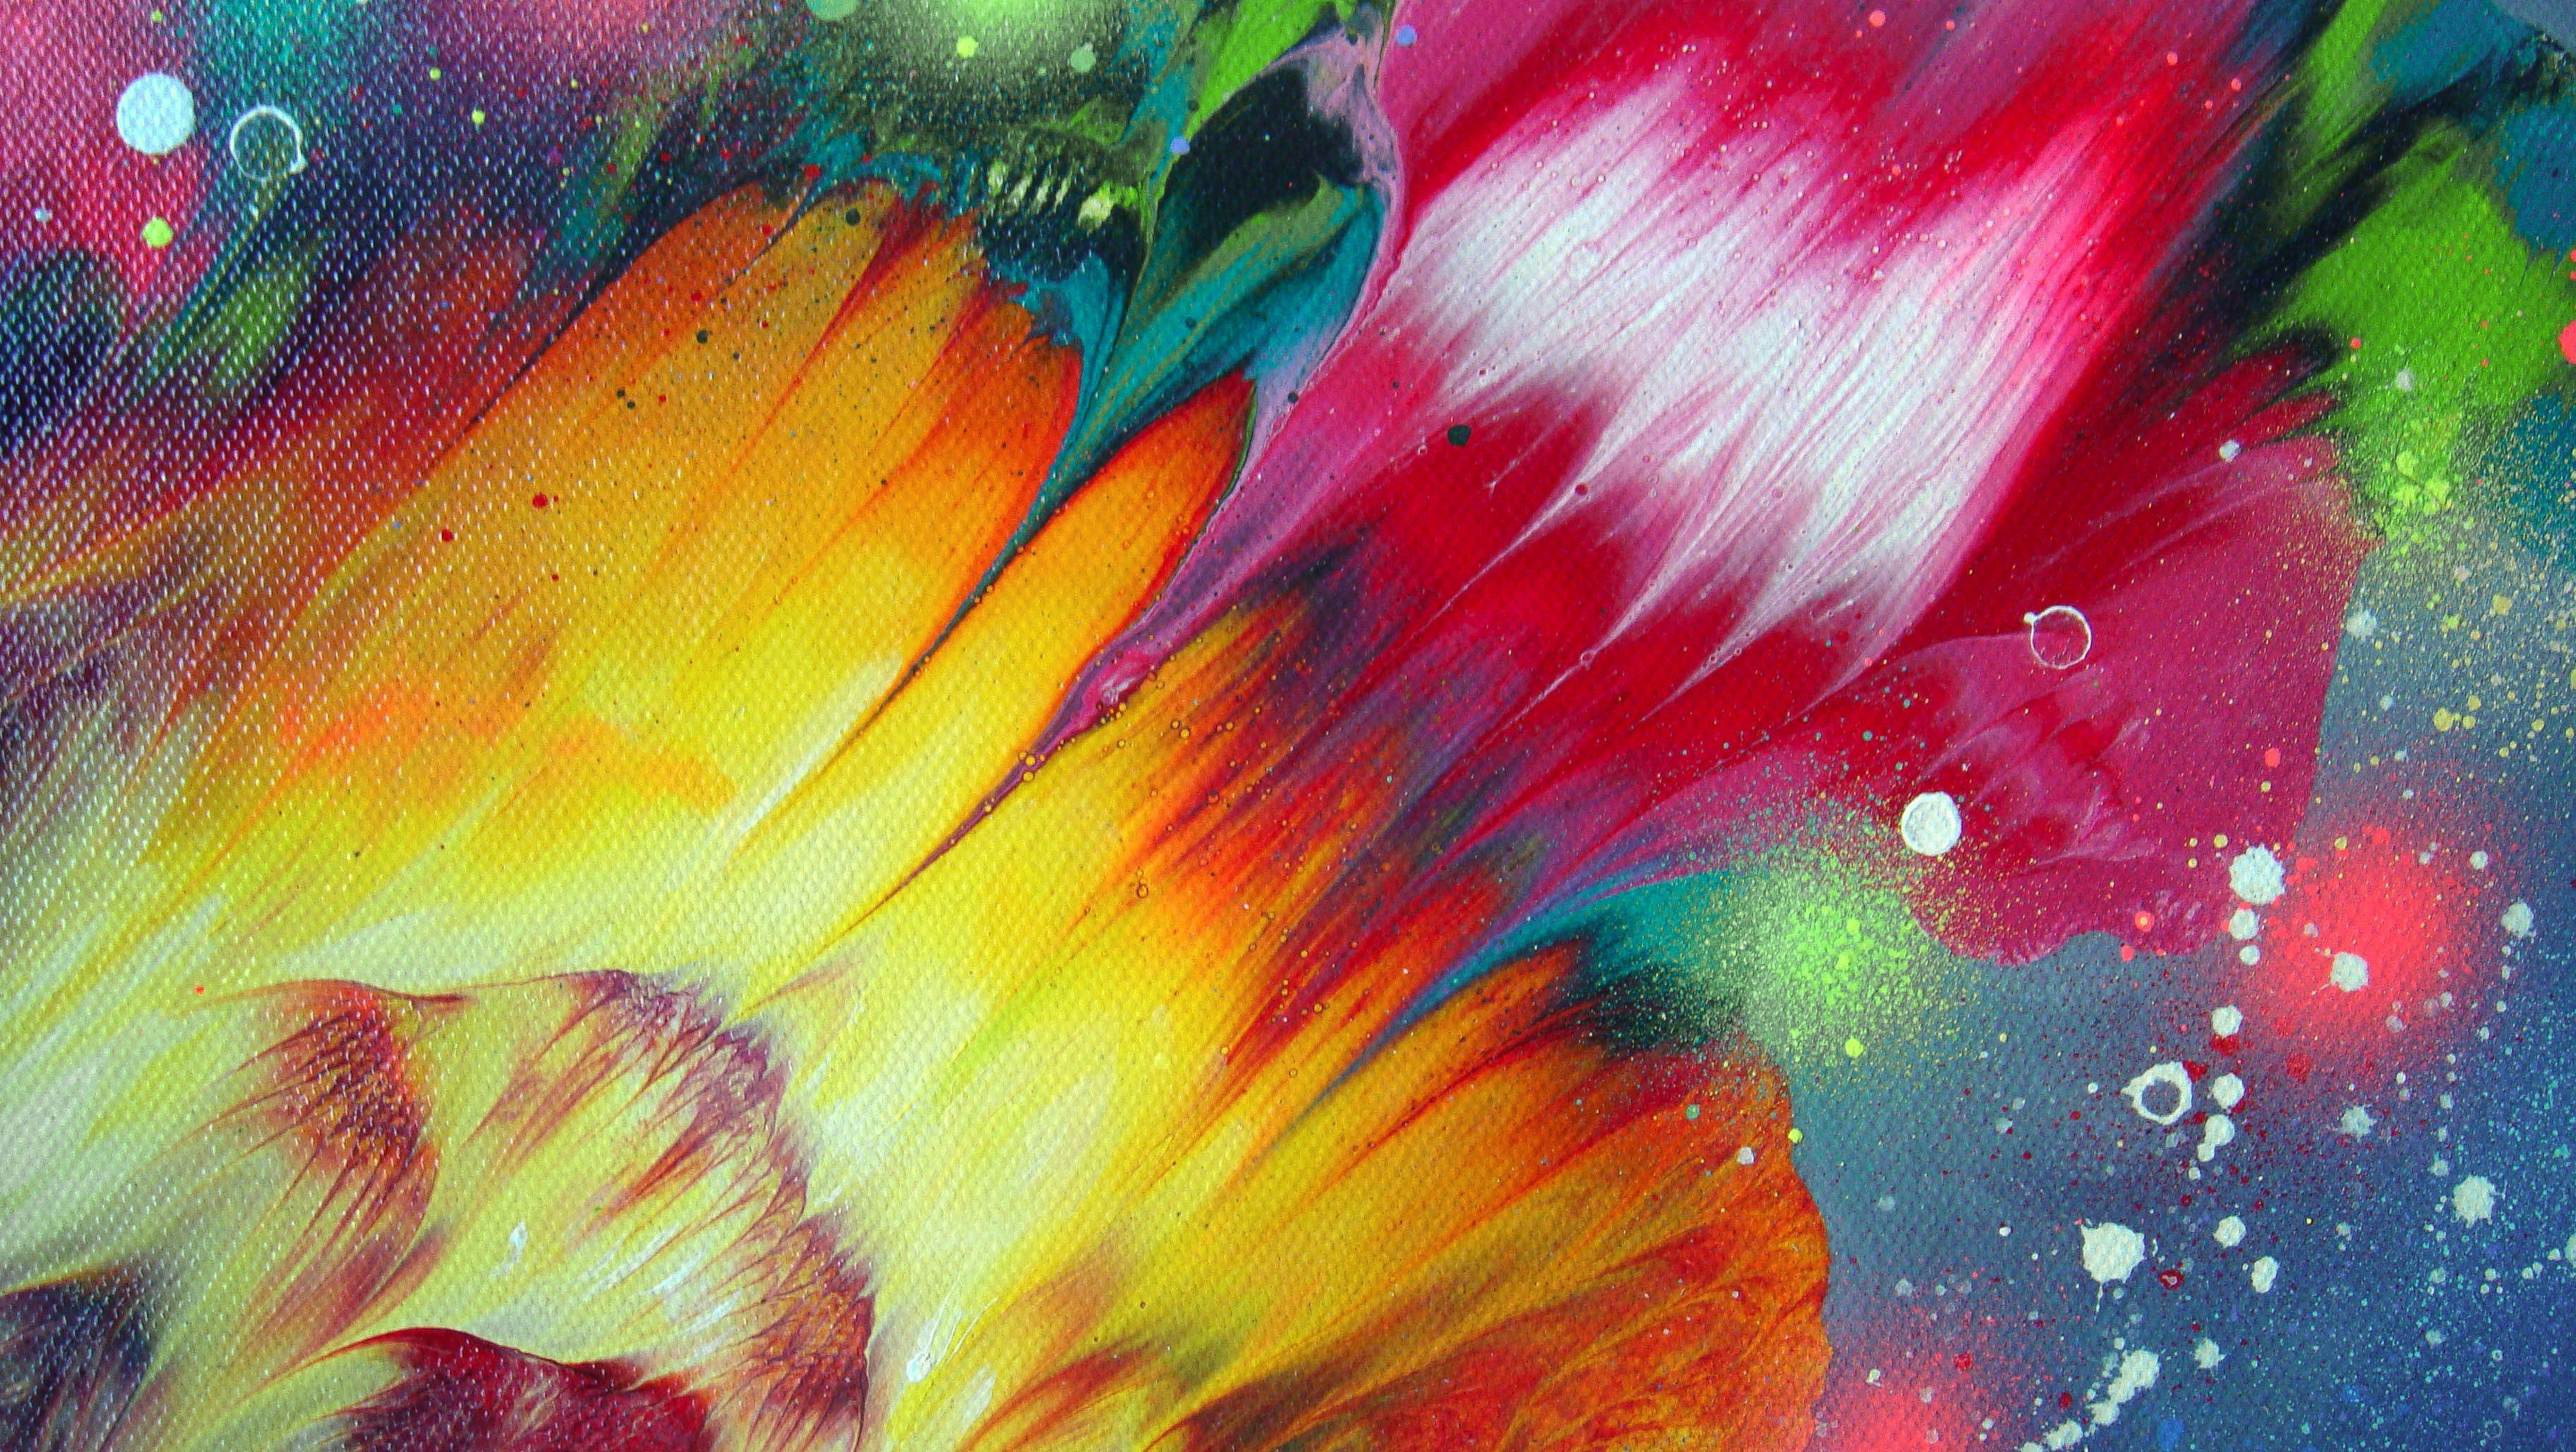 Original hand painted artwork/Abstract Painting on canvas     Vibrant, colourful and expressive original painting,  Inspired by the beauty of nature, flowers and bright colors. The world we live in is made of colour. Colour is what creates beauty,